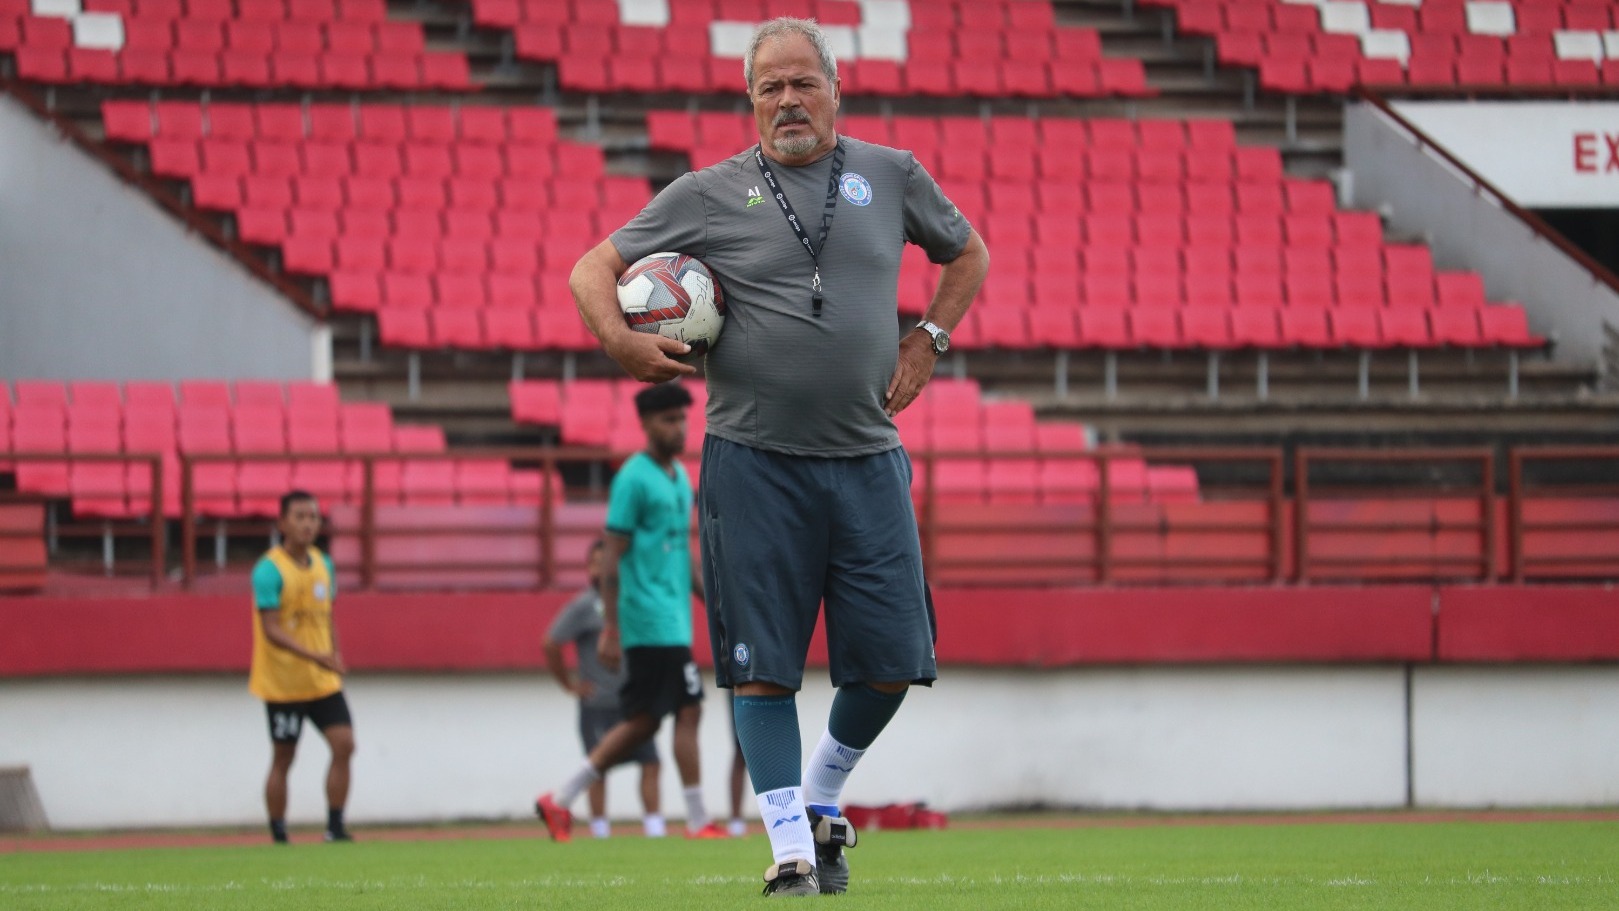 ISL 2019-20 | Not going to tell how Jamshedpur are going to try and beat Goa, says Antonio Iriondo